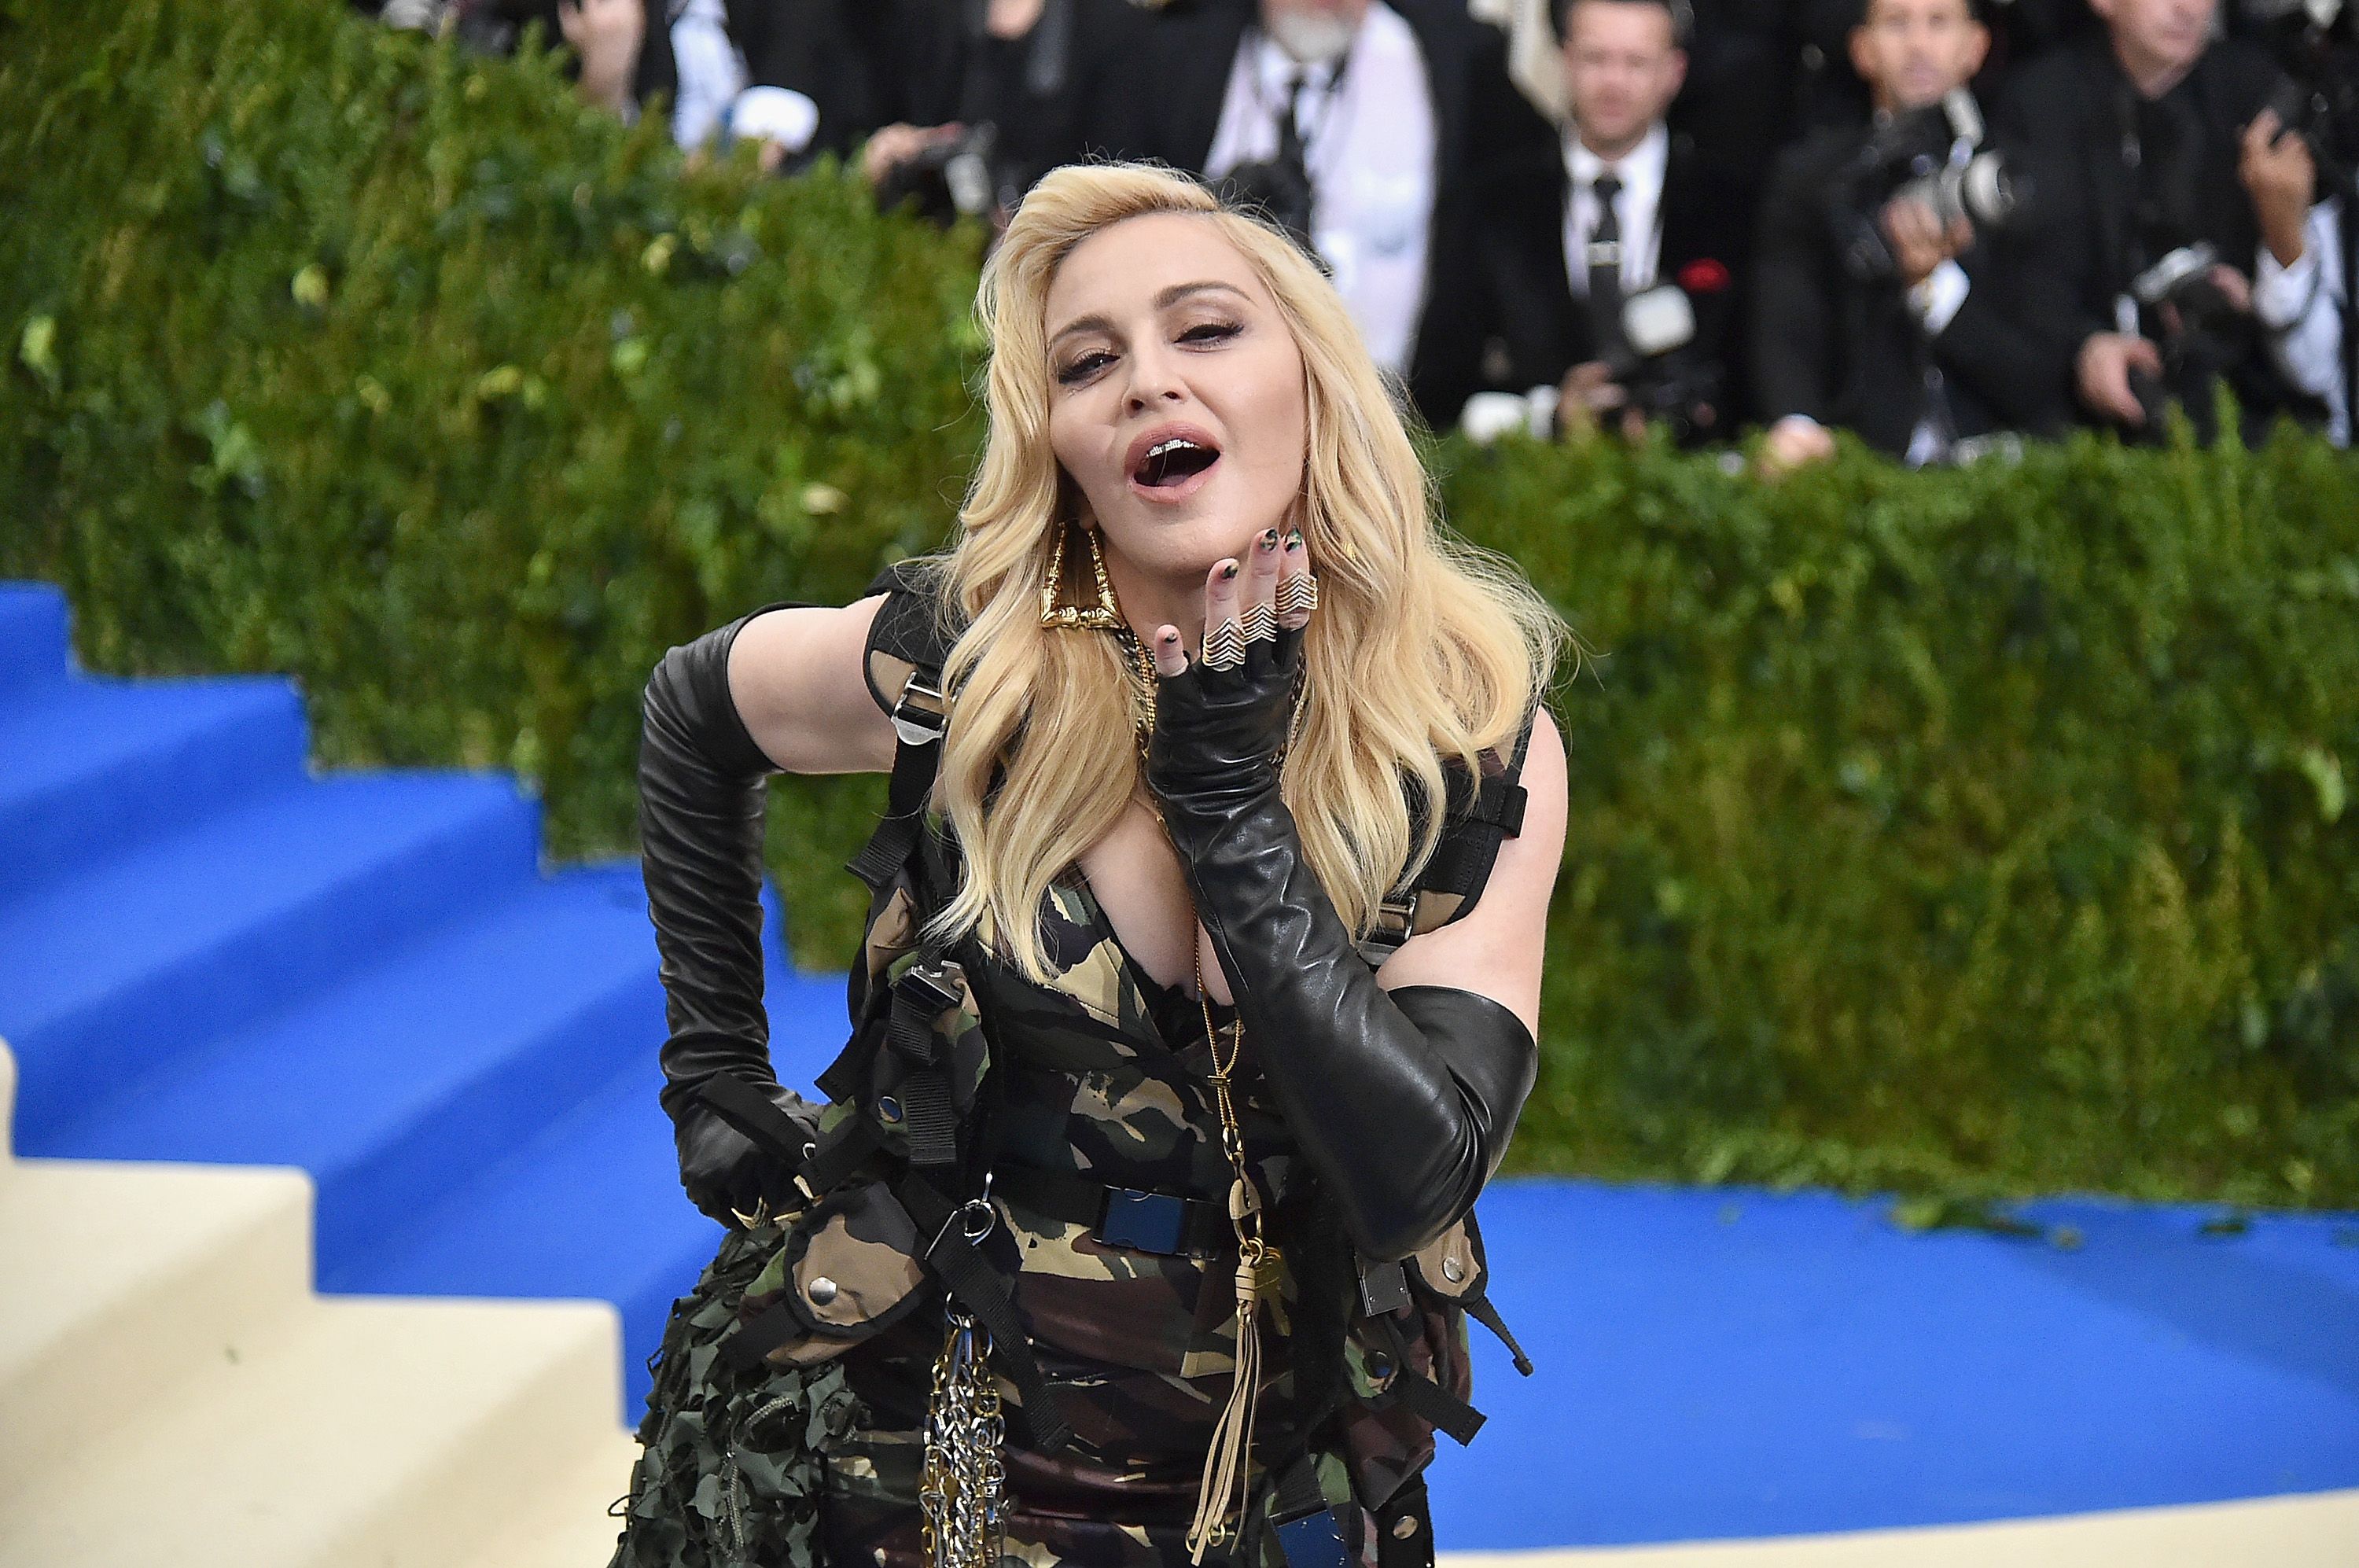 Madonna at the Costume Institute Gala at the Metropolitan Museum of Art in 2017 in New York City | Source: Getty Images